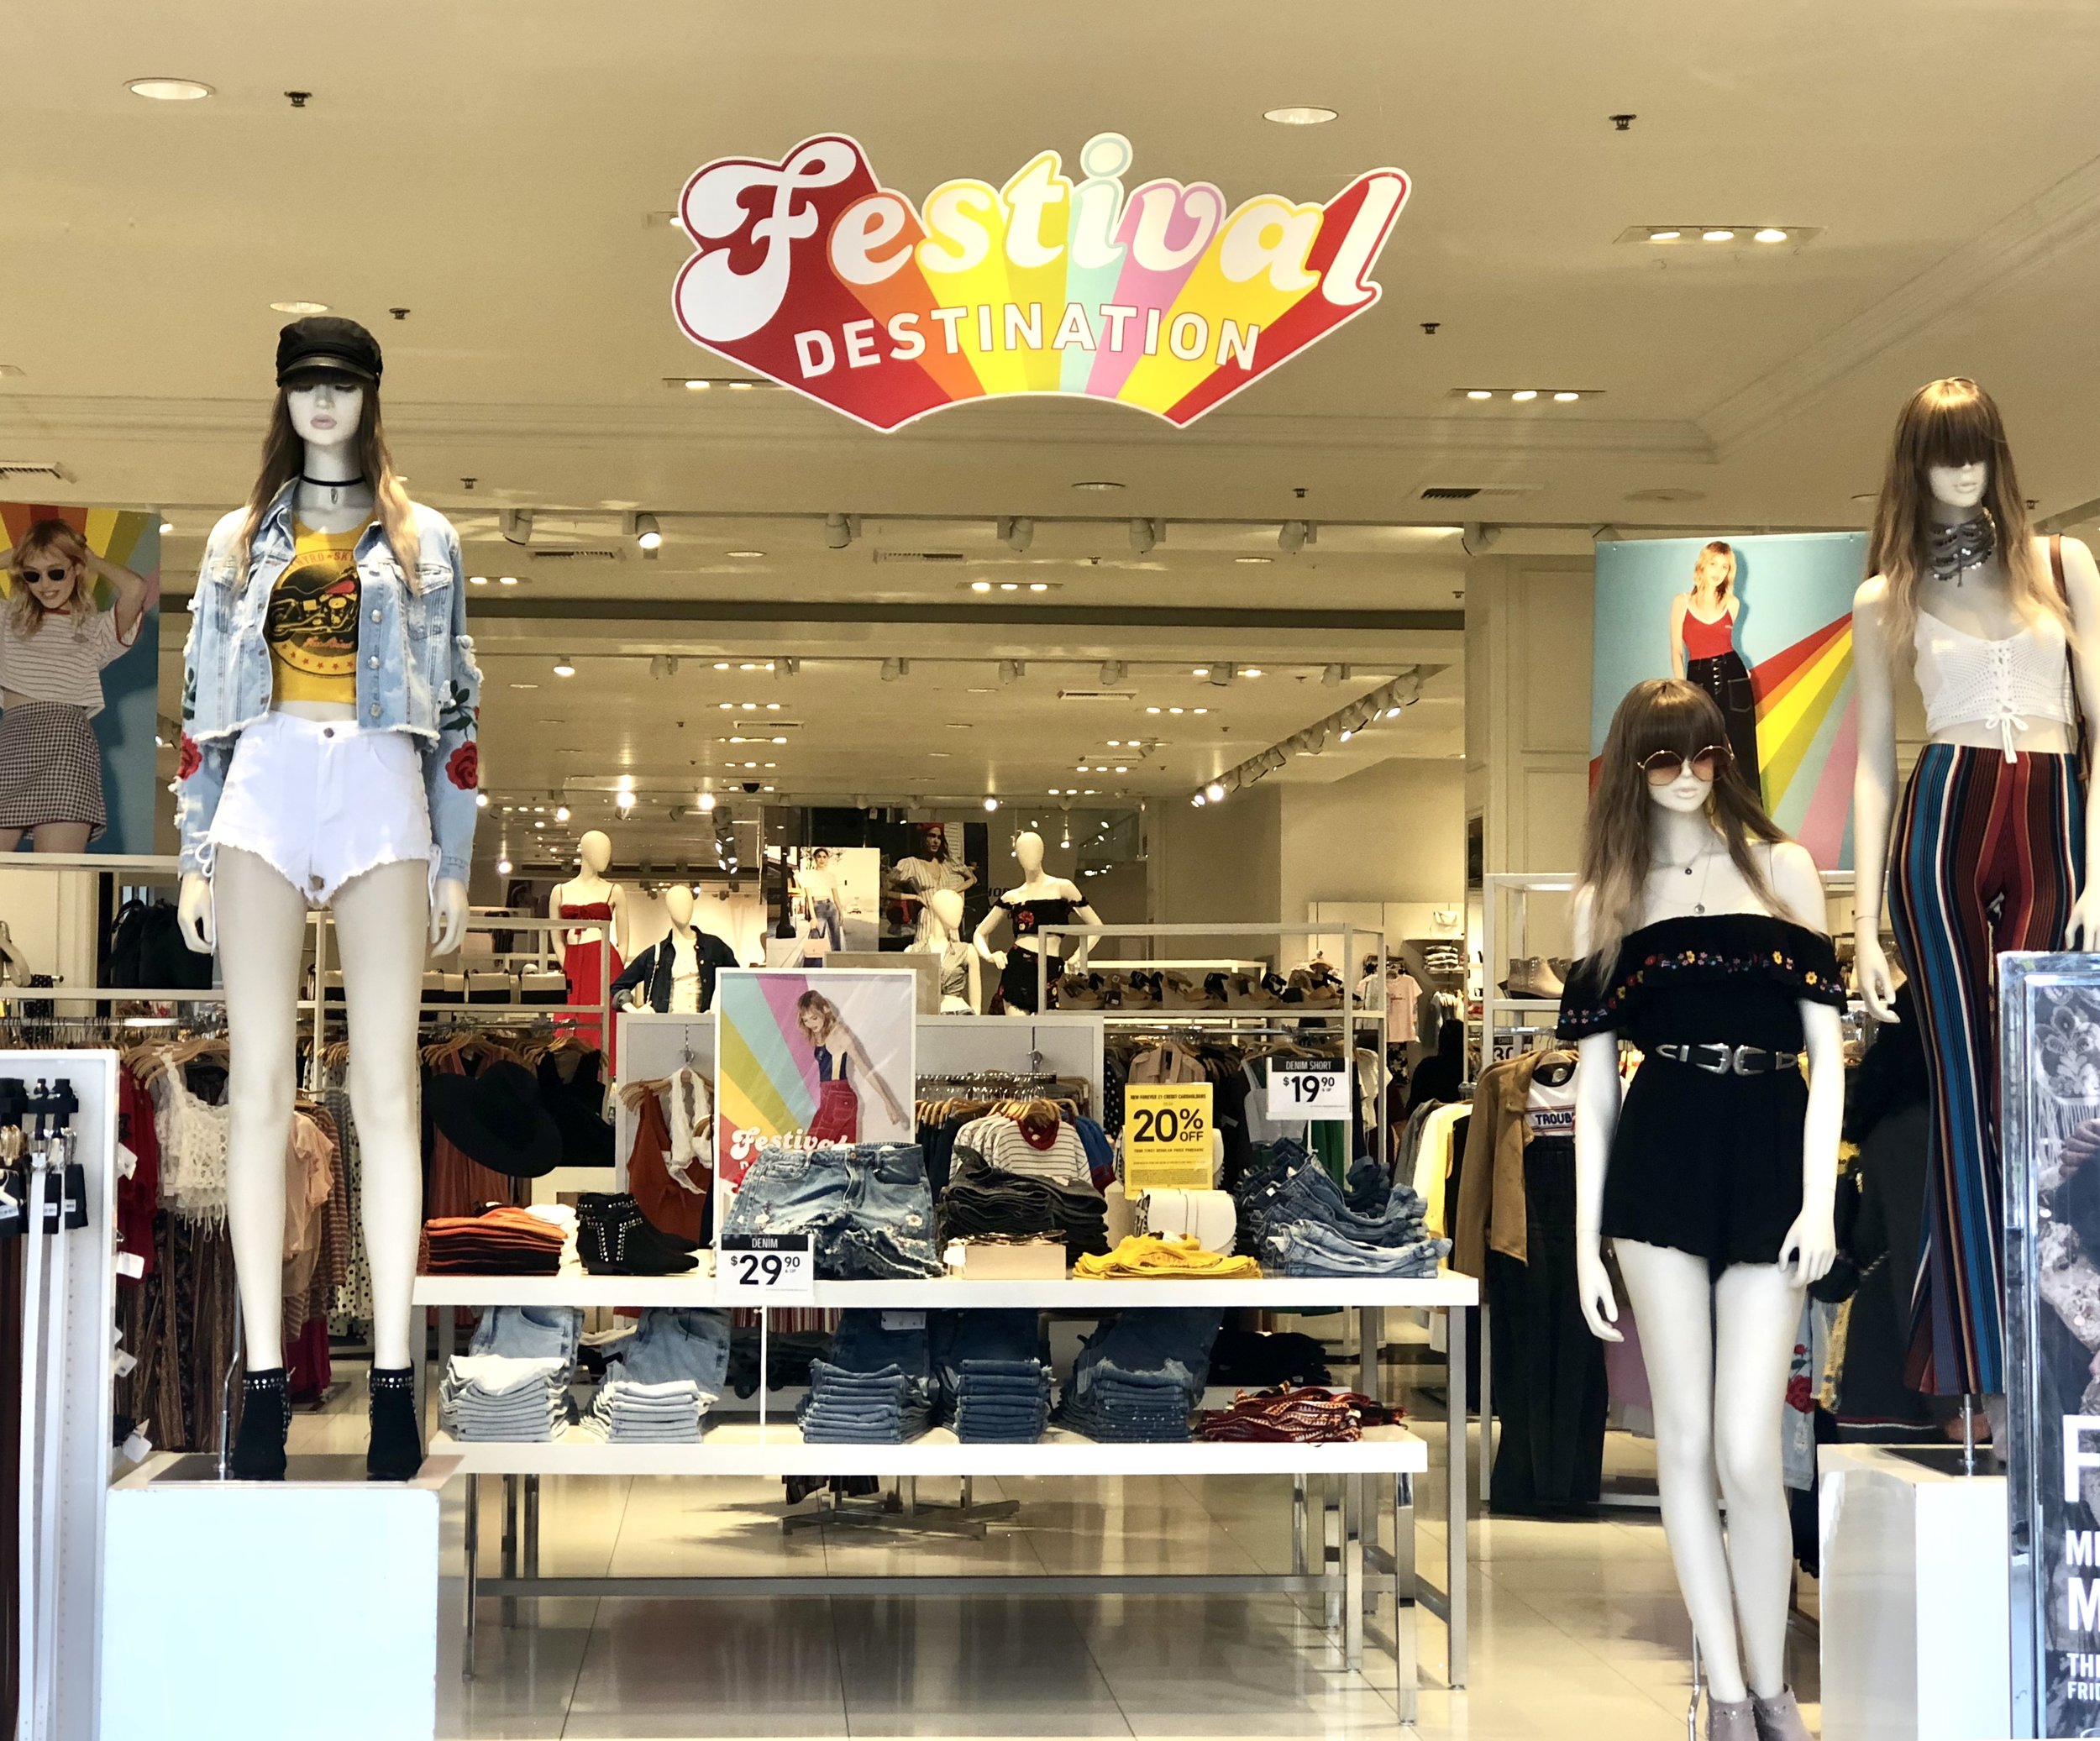 FESTIVAL BANNER IN-STORE DISPLAY